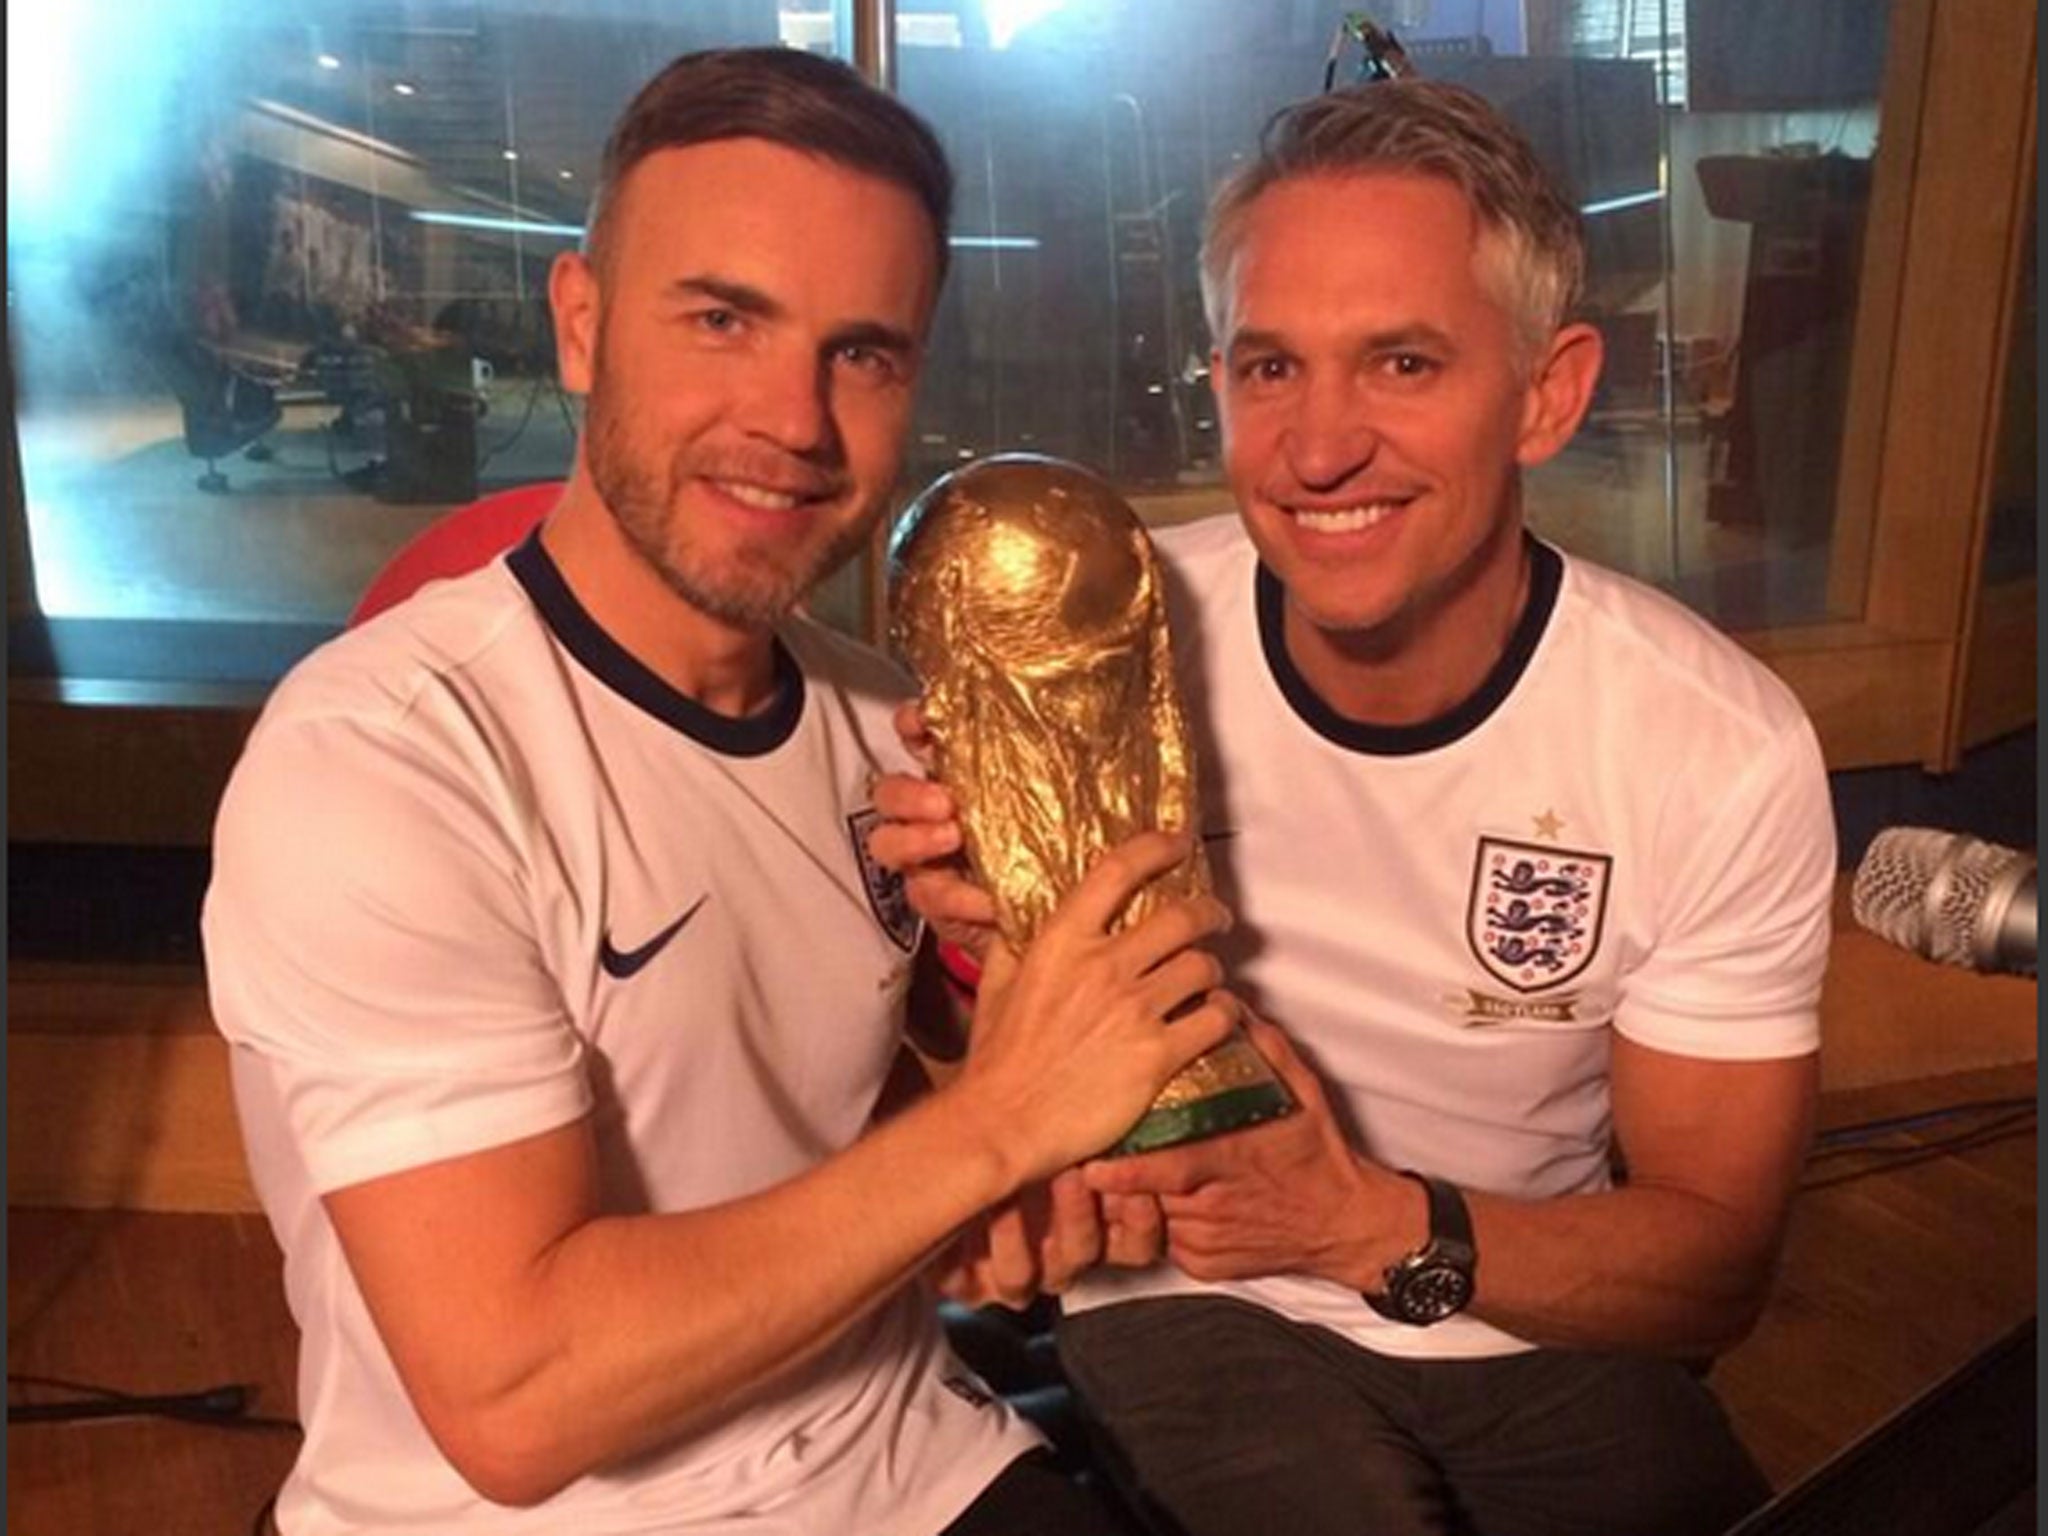 Gary Lineker tweeted this photo of himself and Gary Barlow from the studio where the World Cup song's video is being filmed